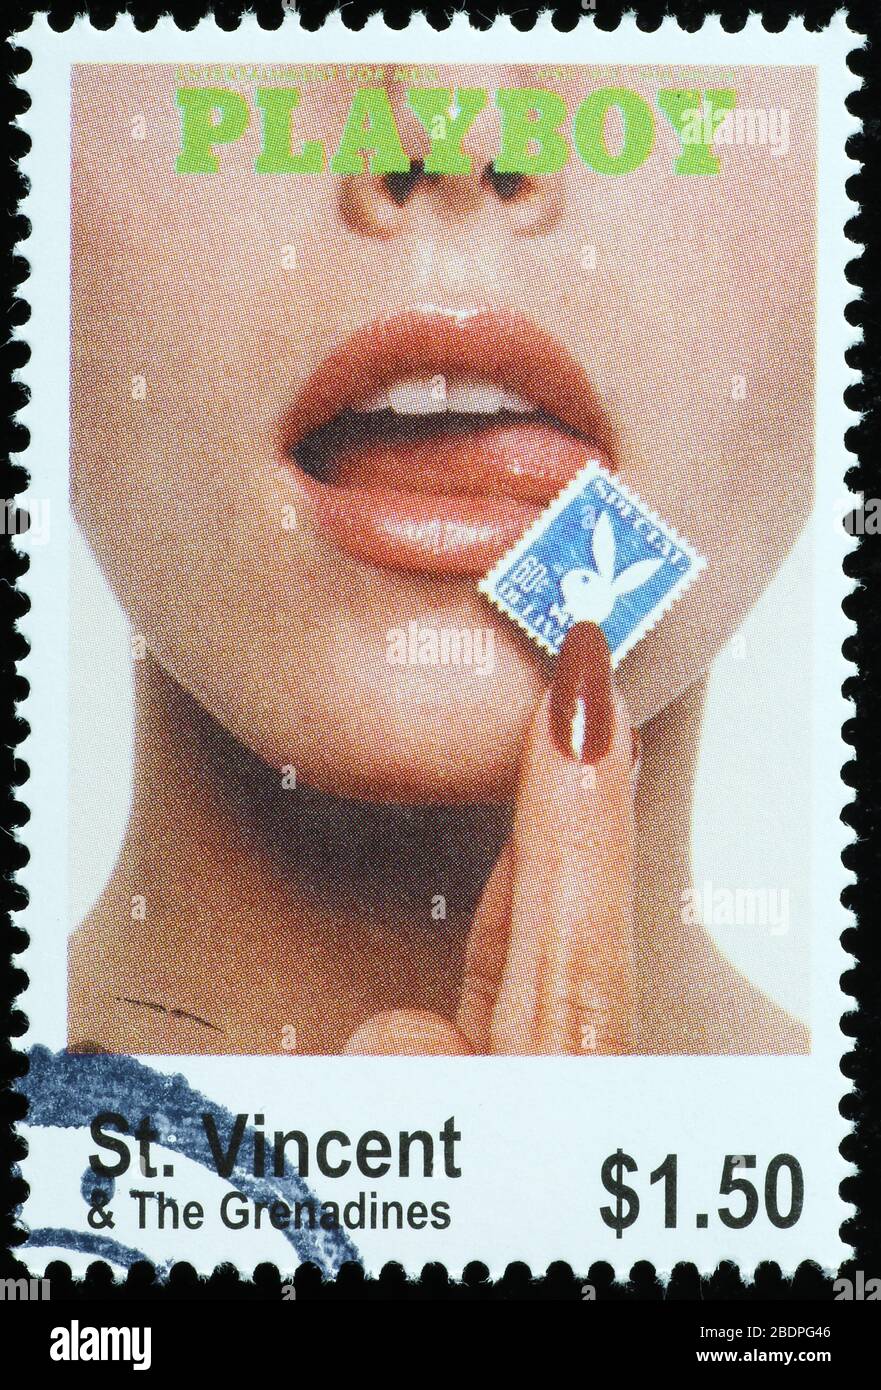 Old cover of Playboy magazine on postage stamp Stock Photo